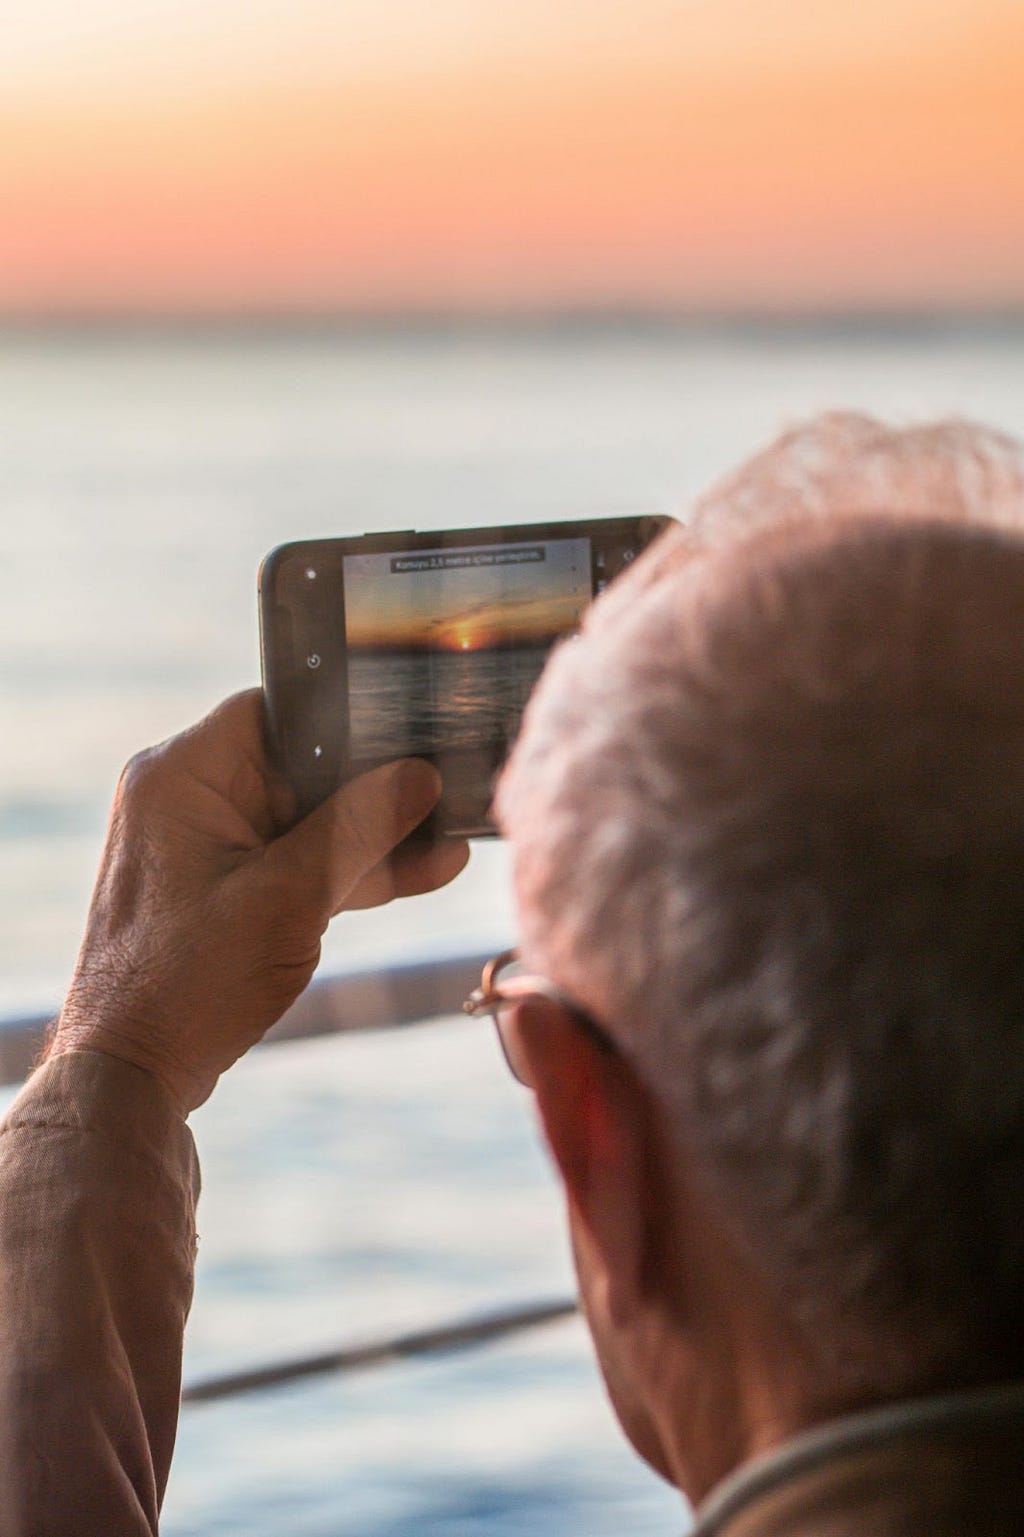 An elderly man taking a photo of the sunset on his smart phone